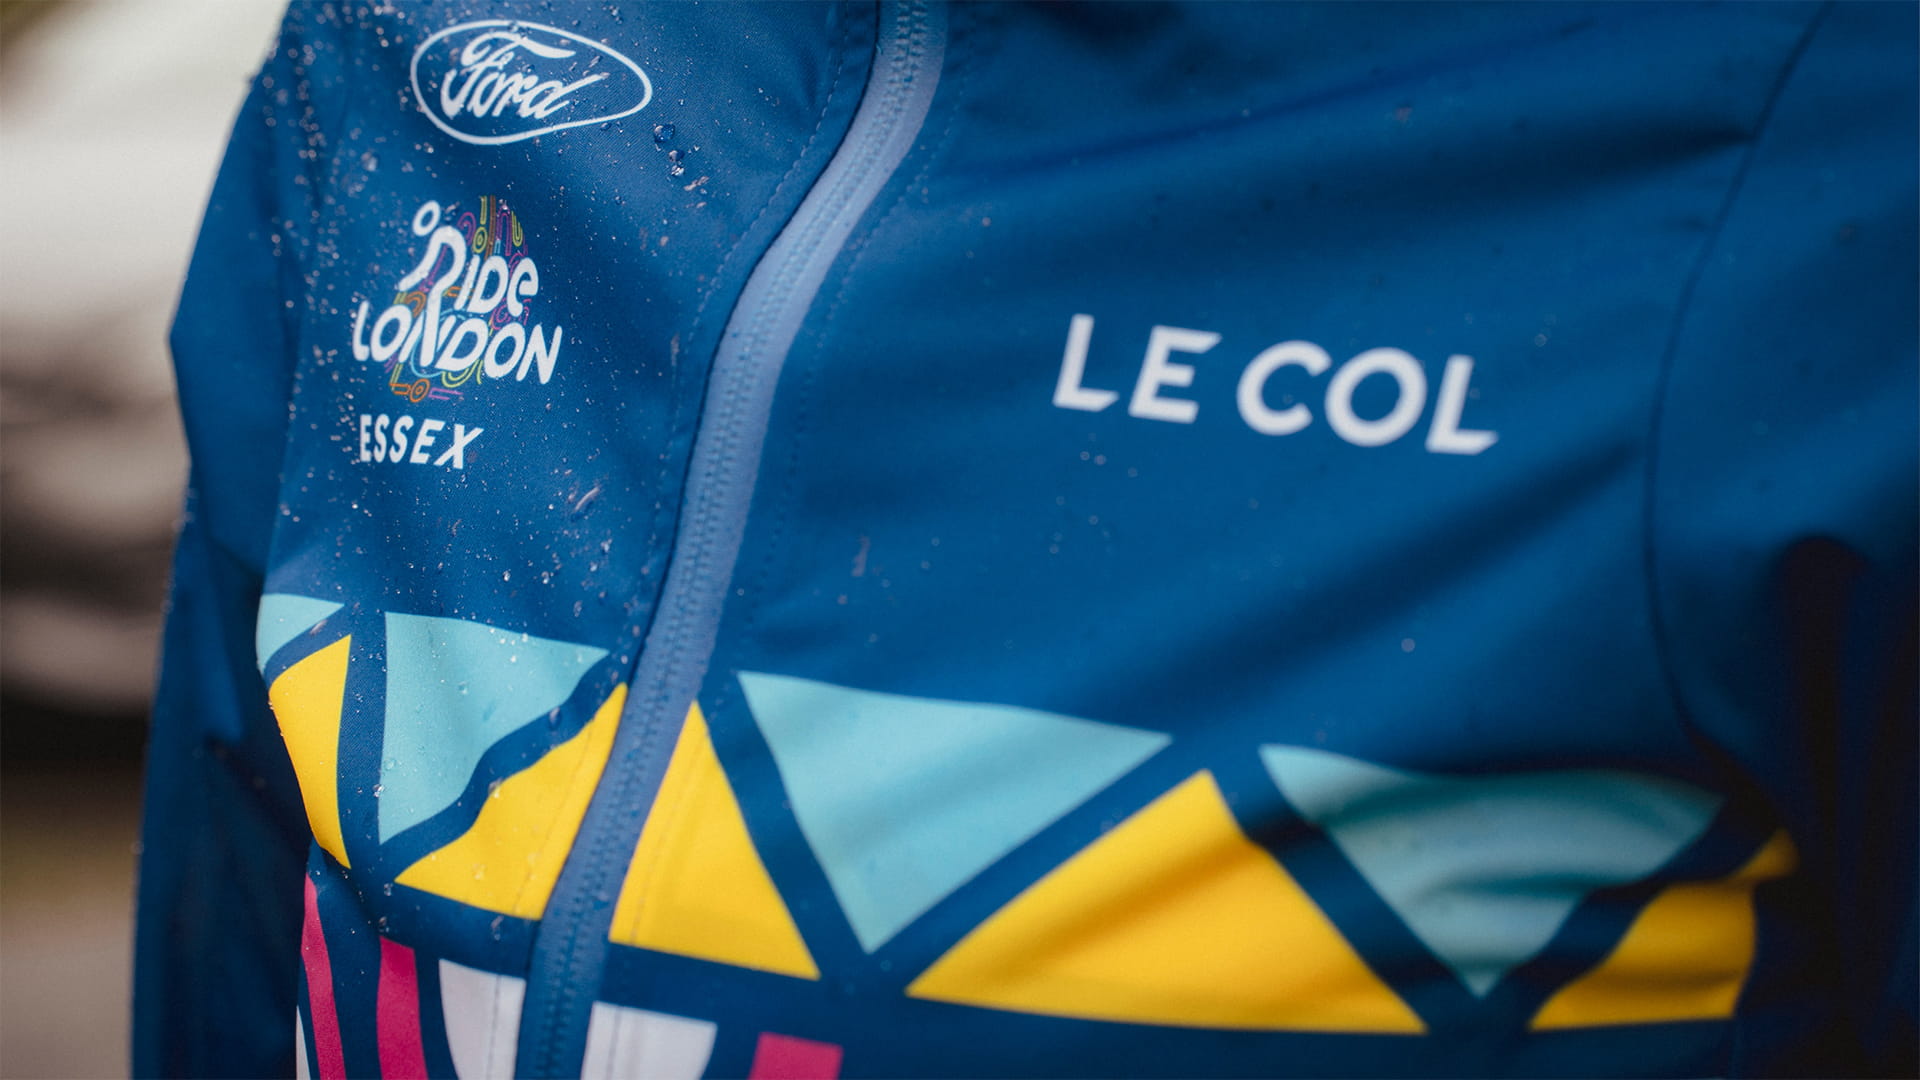 Close up of a Le Col Ford RideLondon jacket